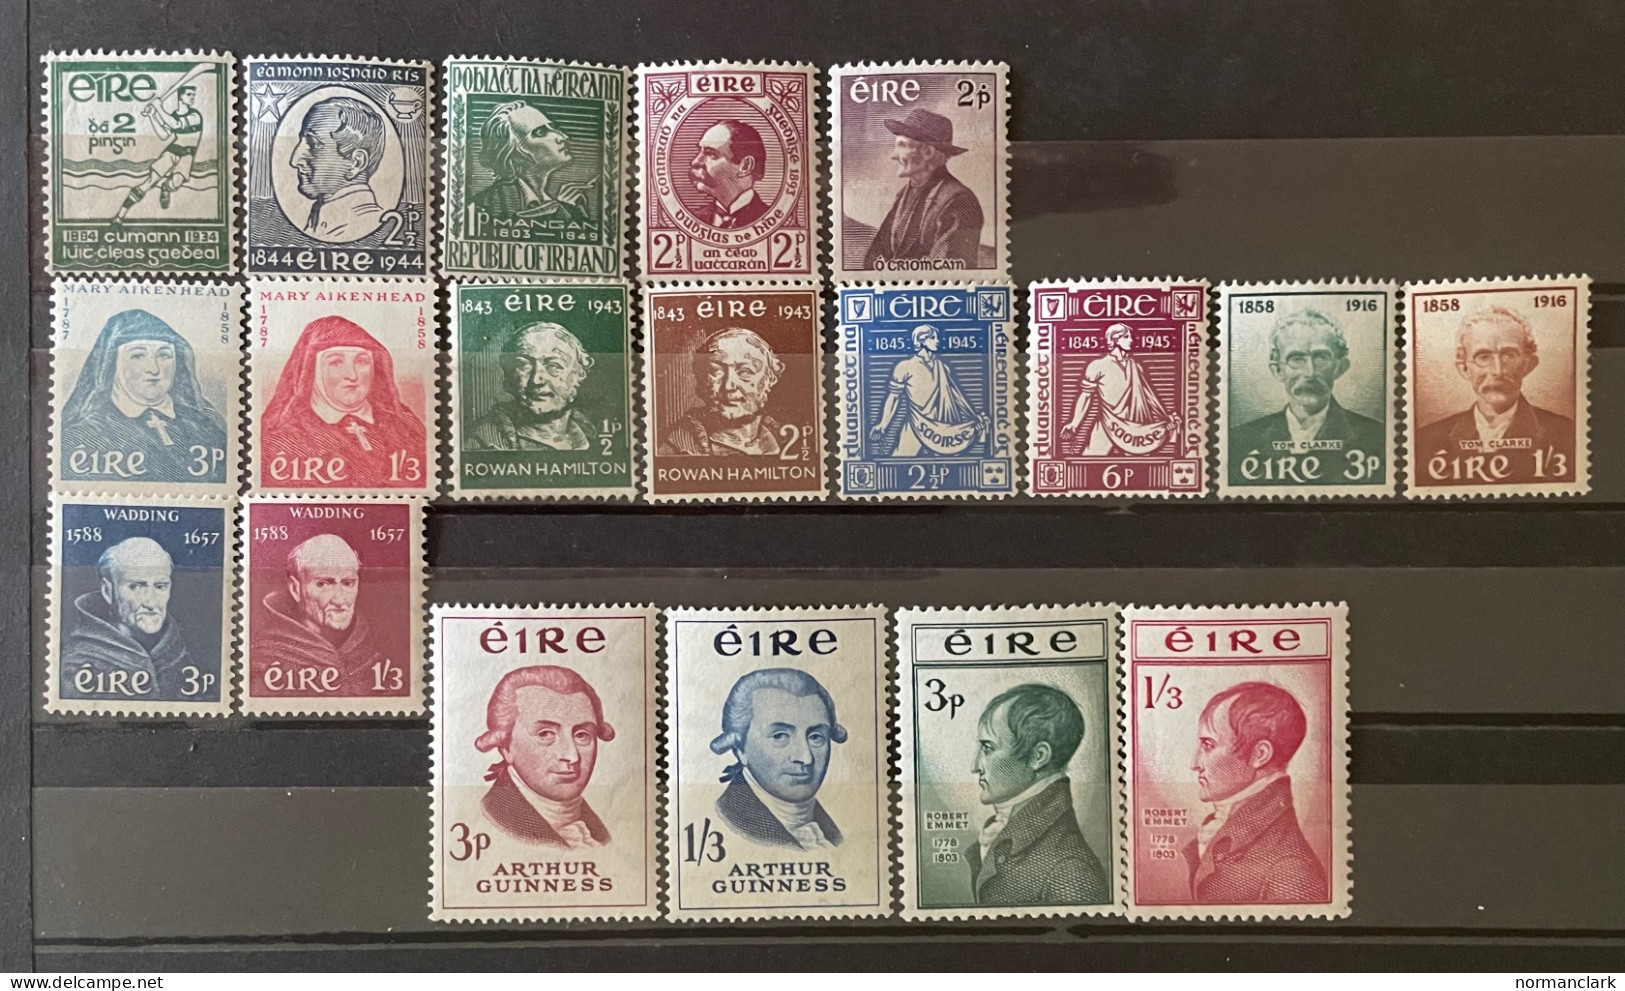 IRELAND 1934-59 SELECTION OF MNH COMMEMS WITH EMMETT WADDING CLARKE GUINNESS (19) - Colecciones & Series